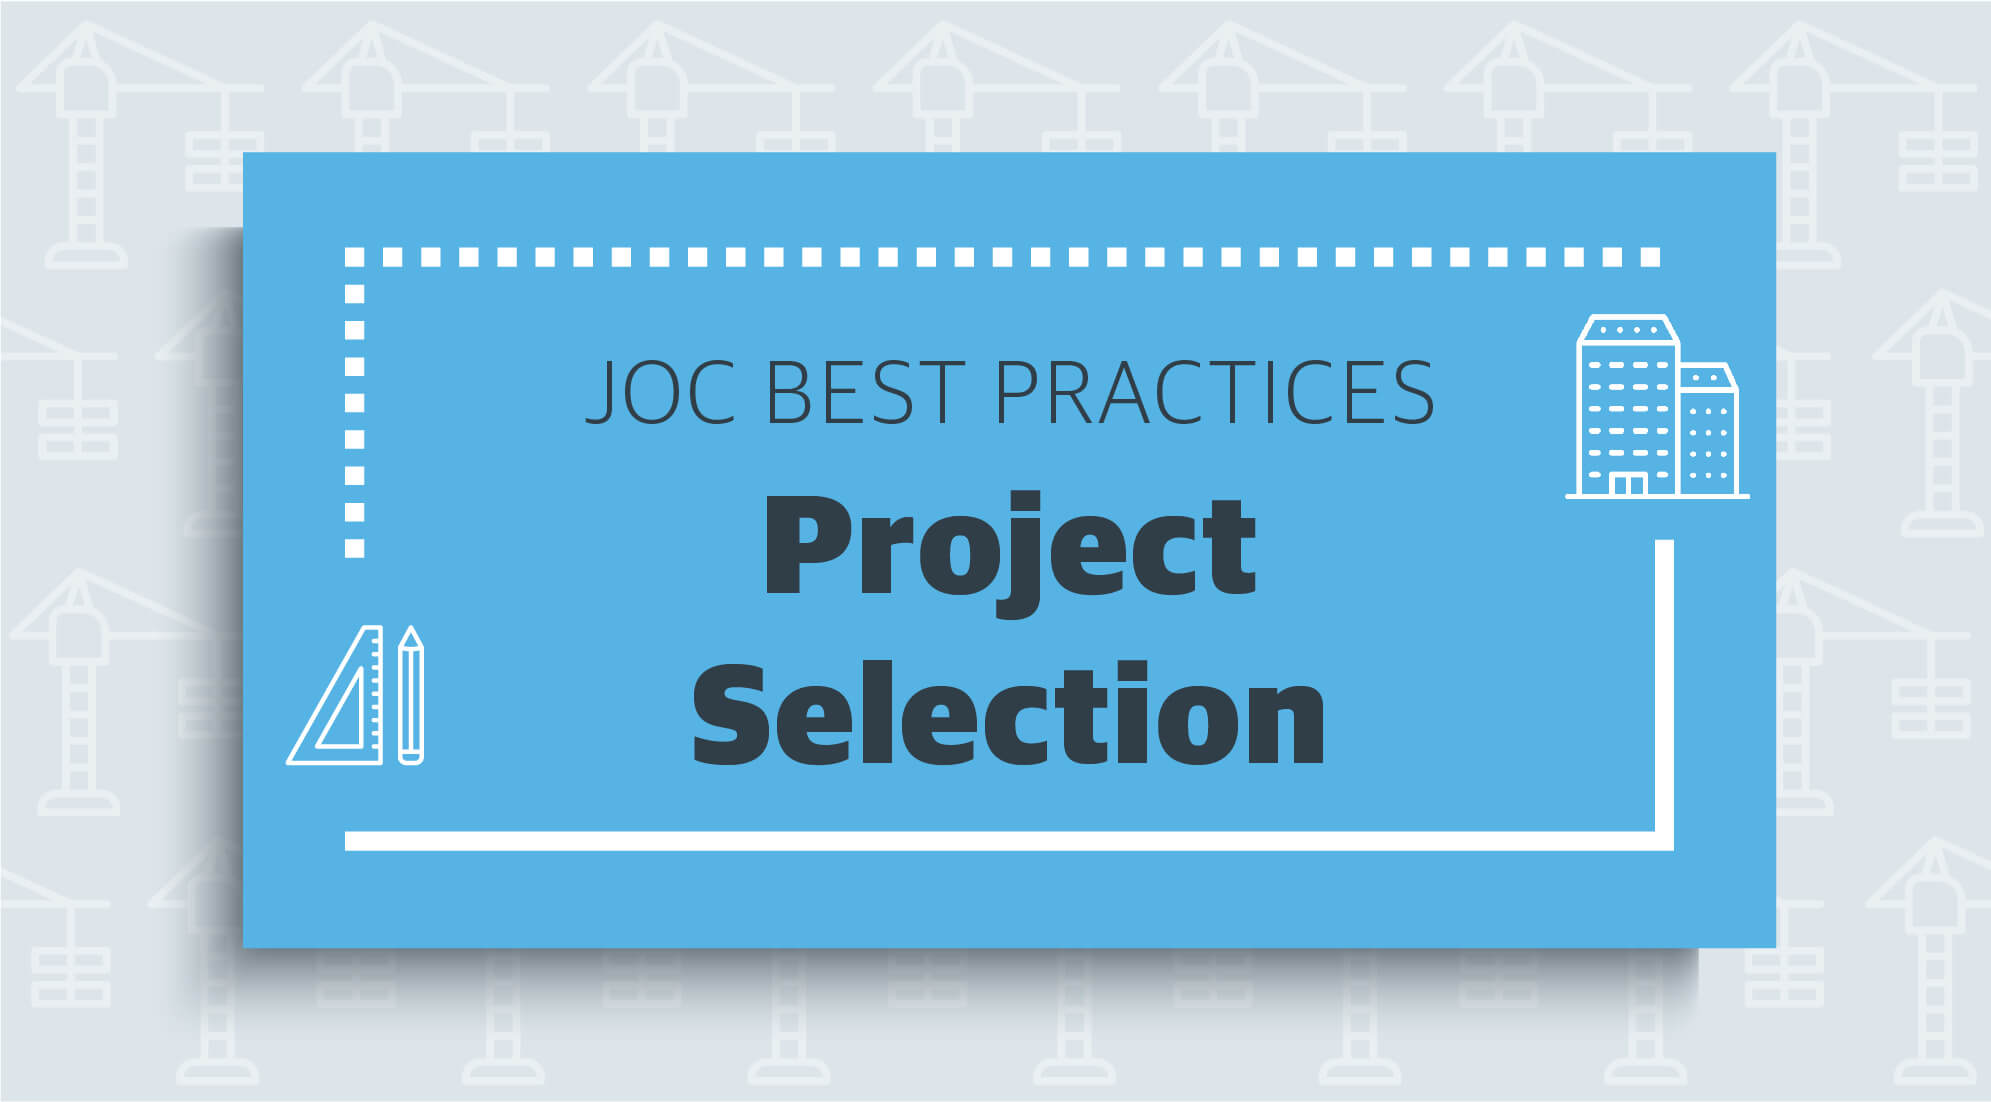 Read up on Job Order Contracting best practices for project selection.